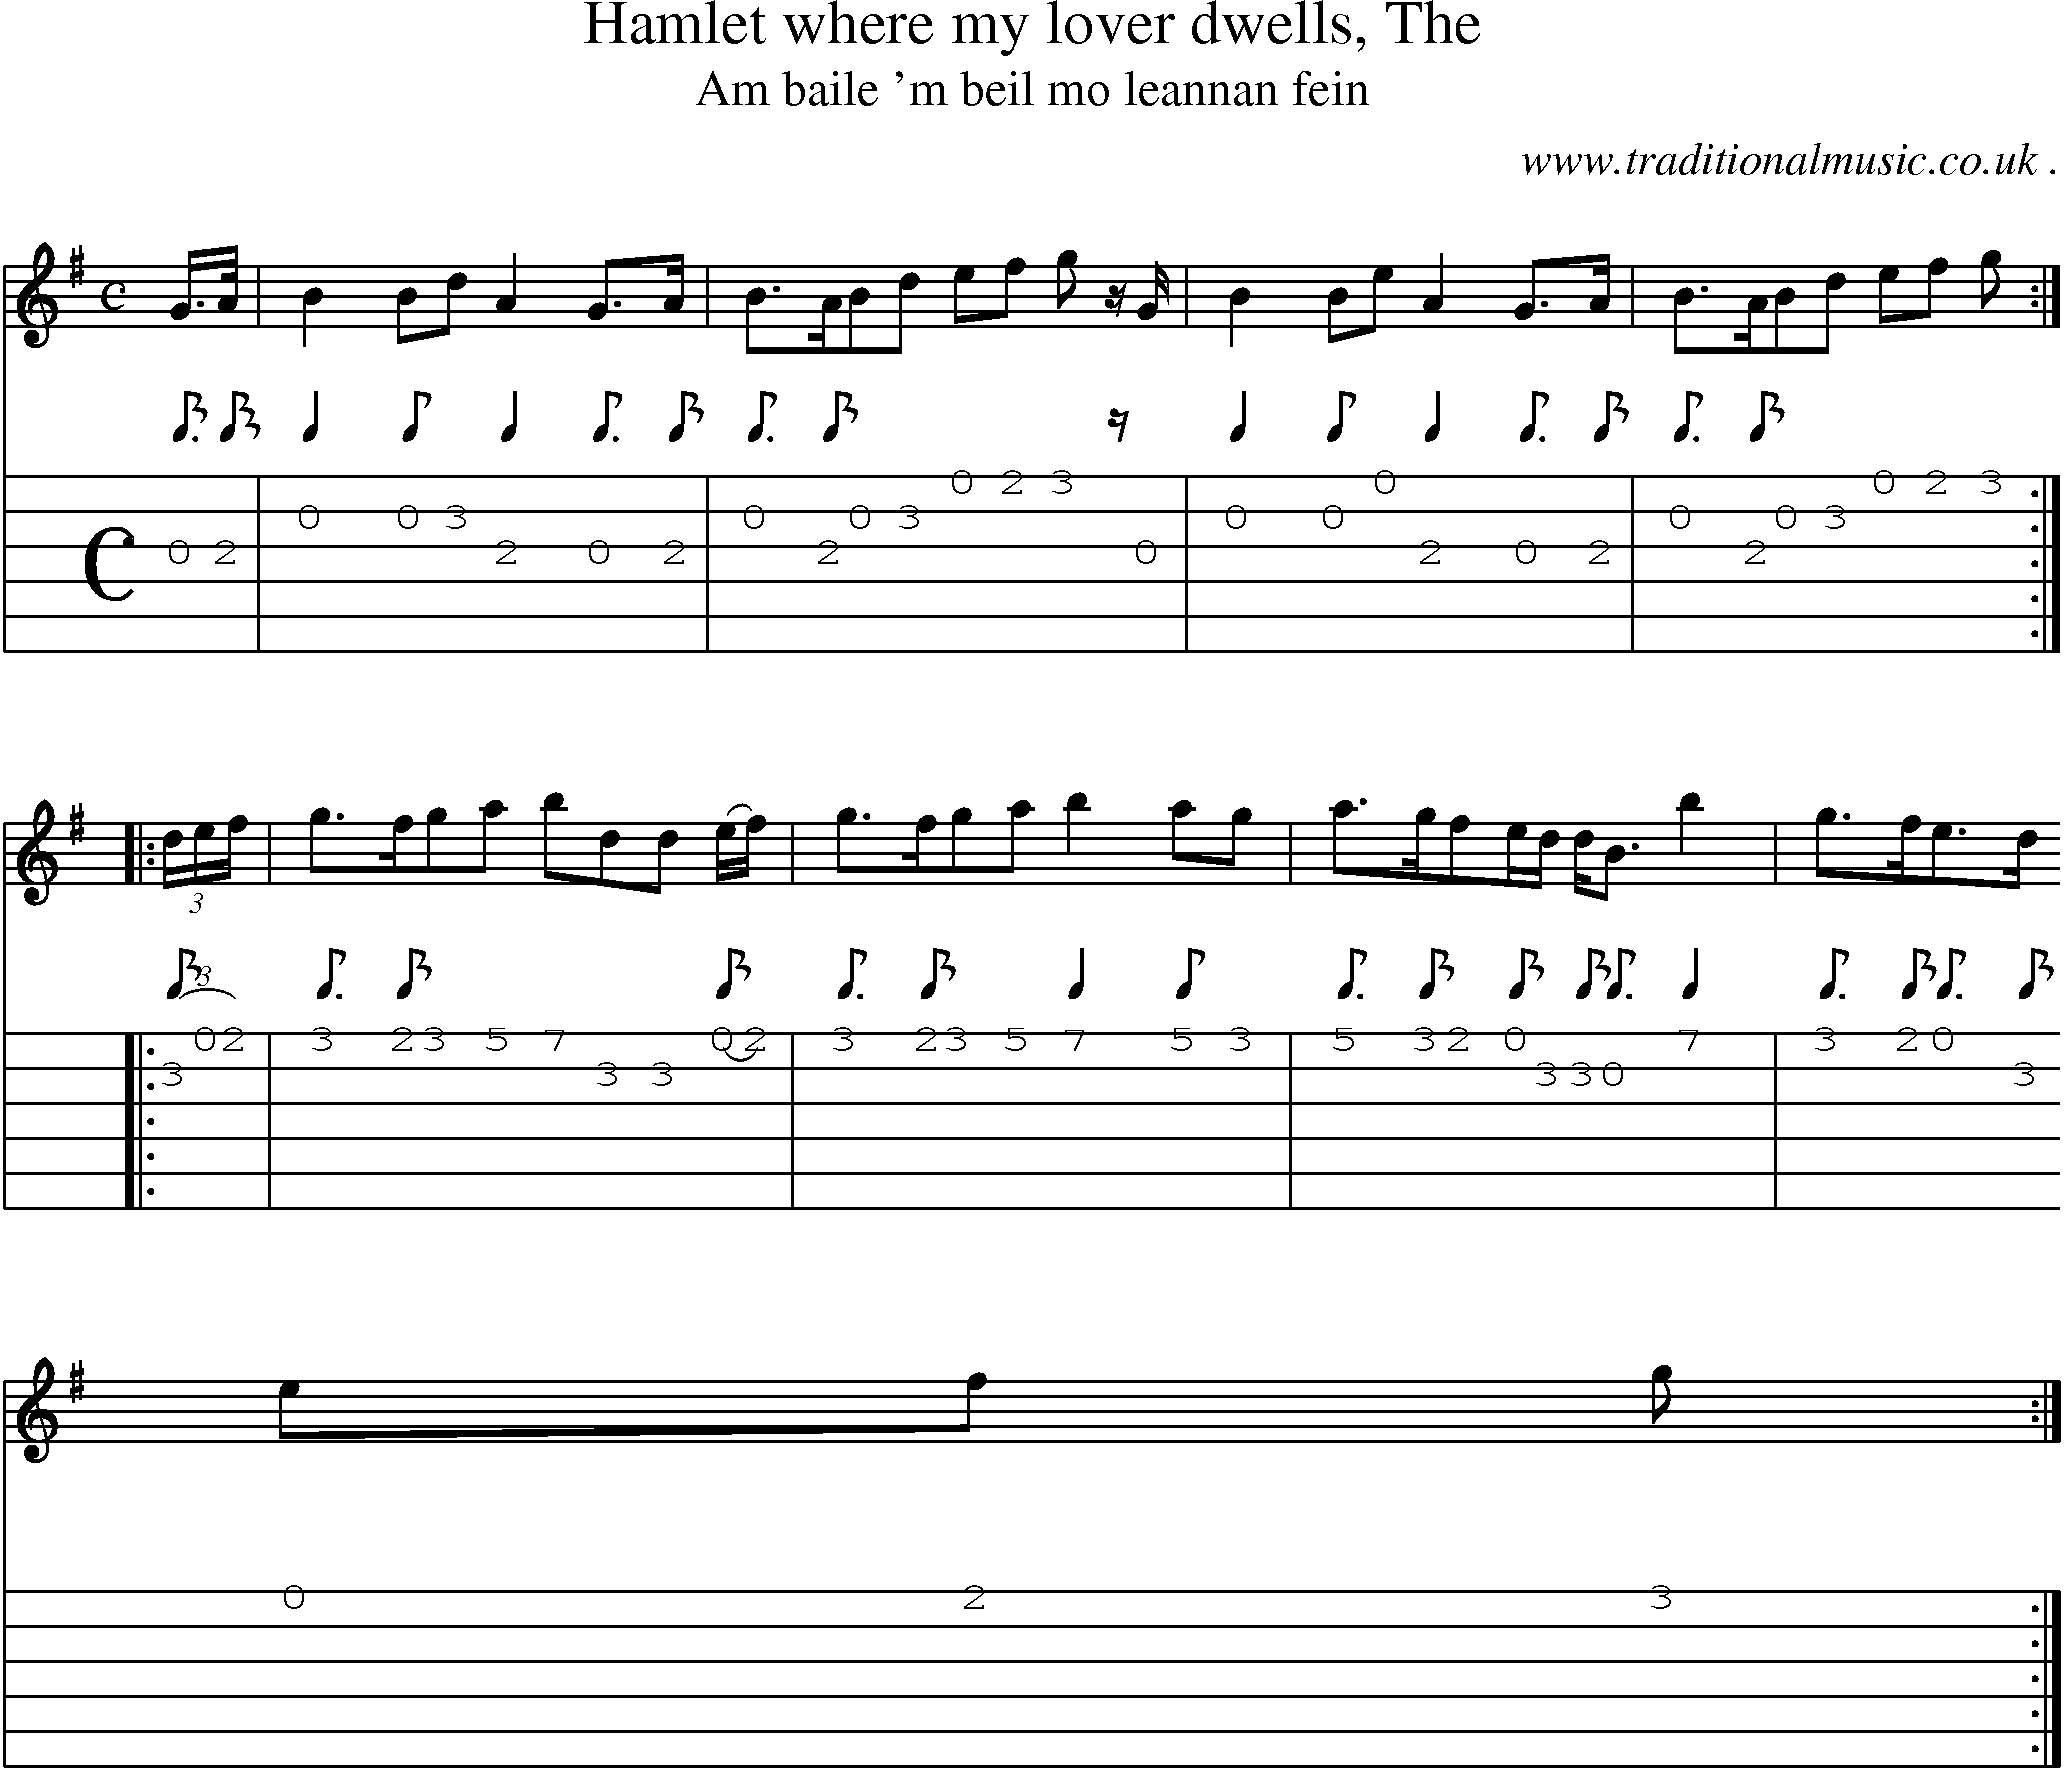 Sheet-music  score, Chords and Guitar Tabs for Hamlet Where My Lover Dwells The